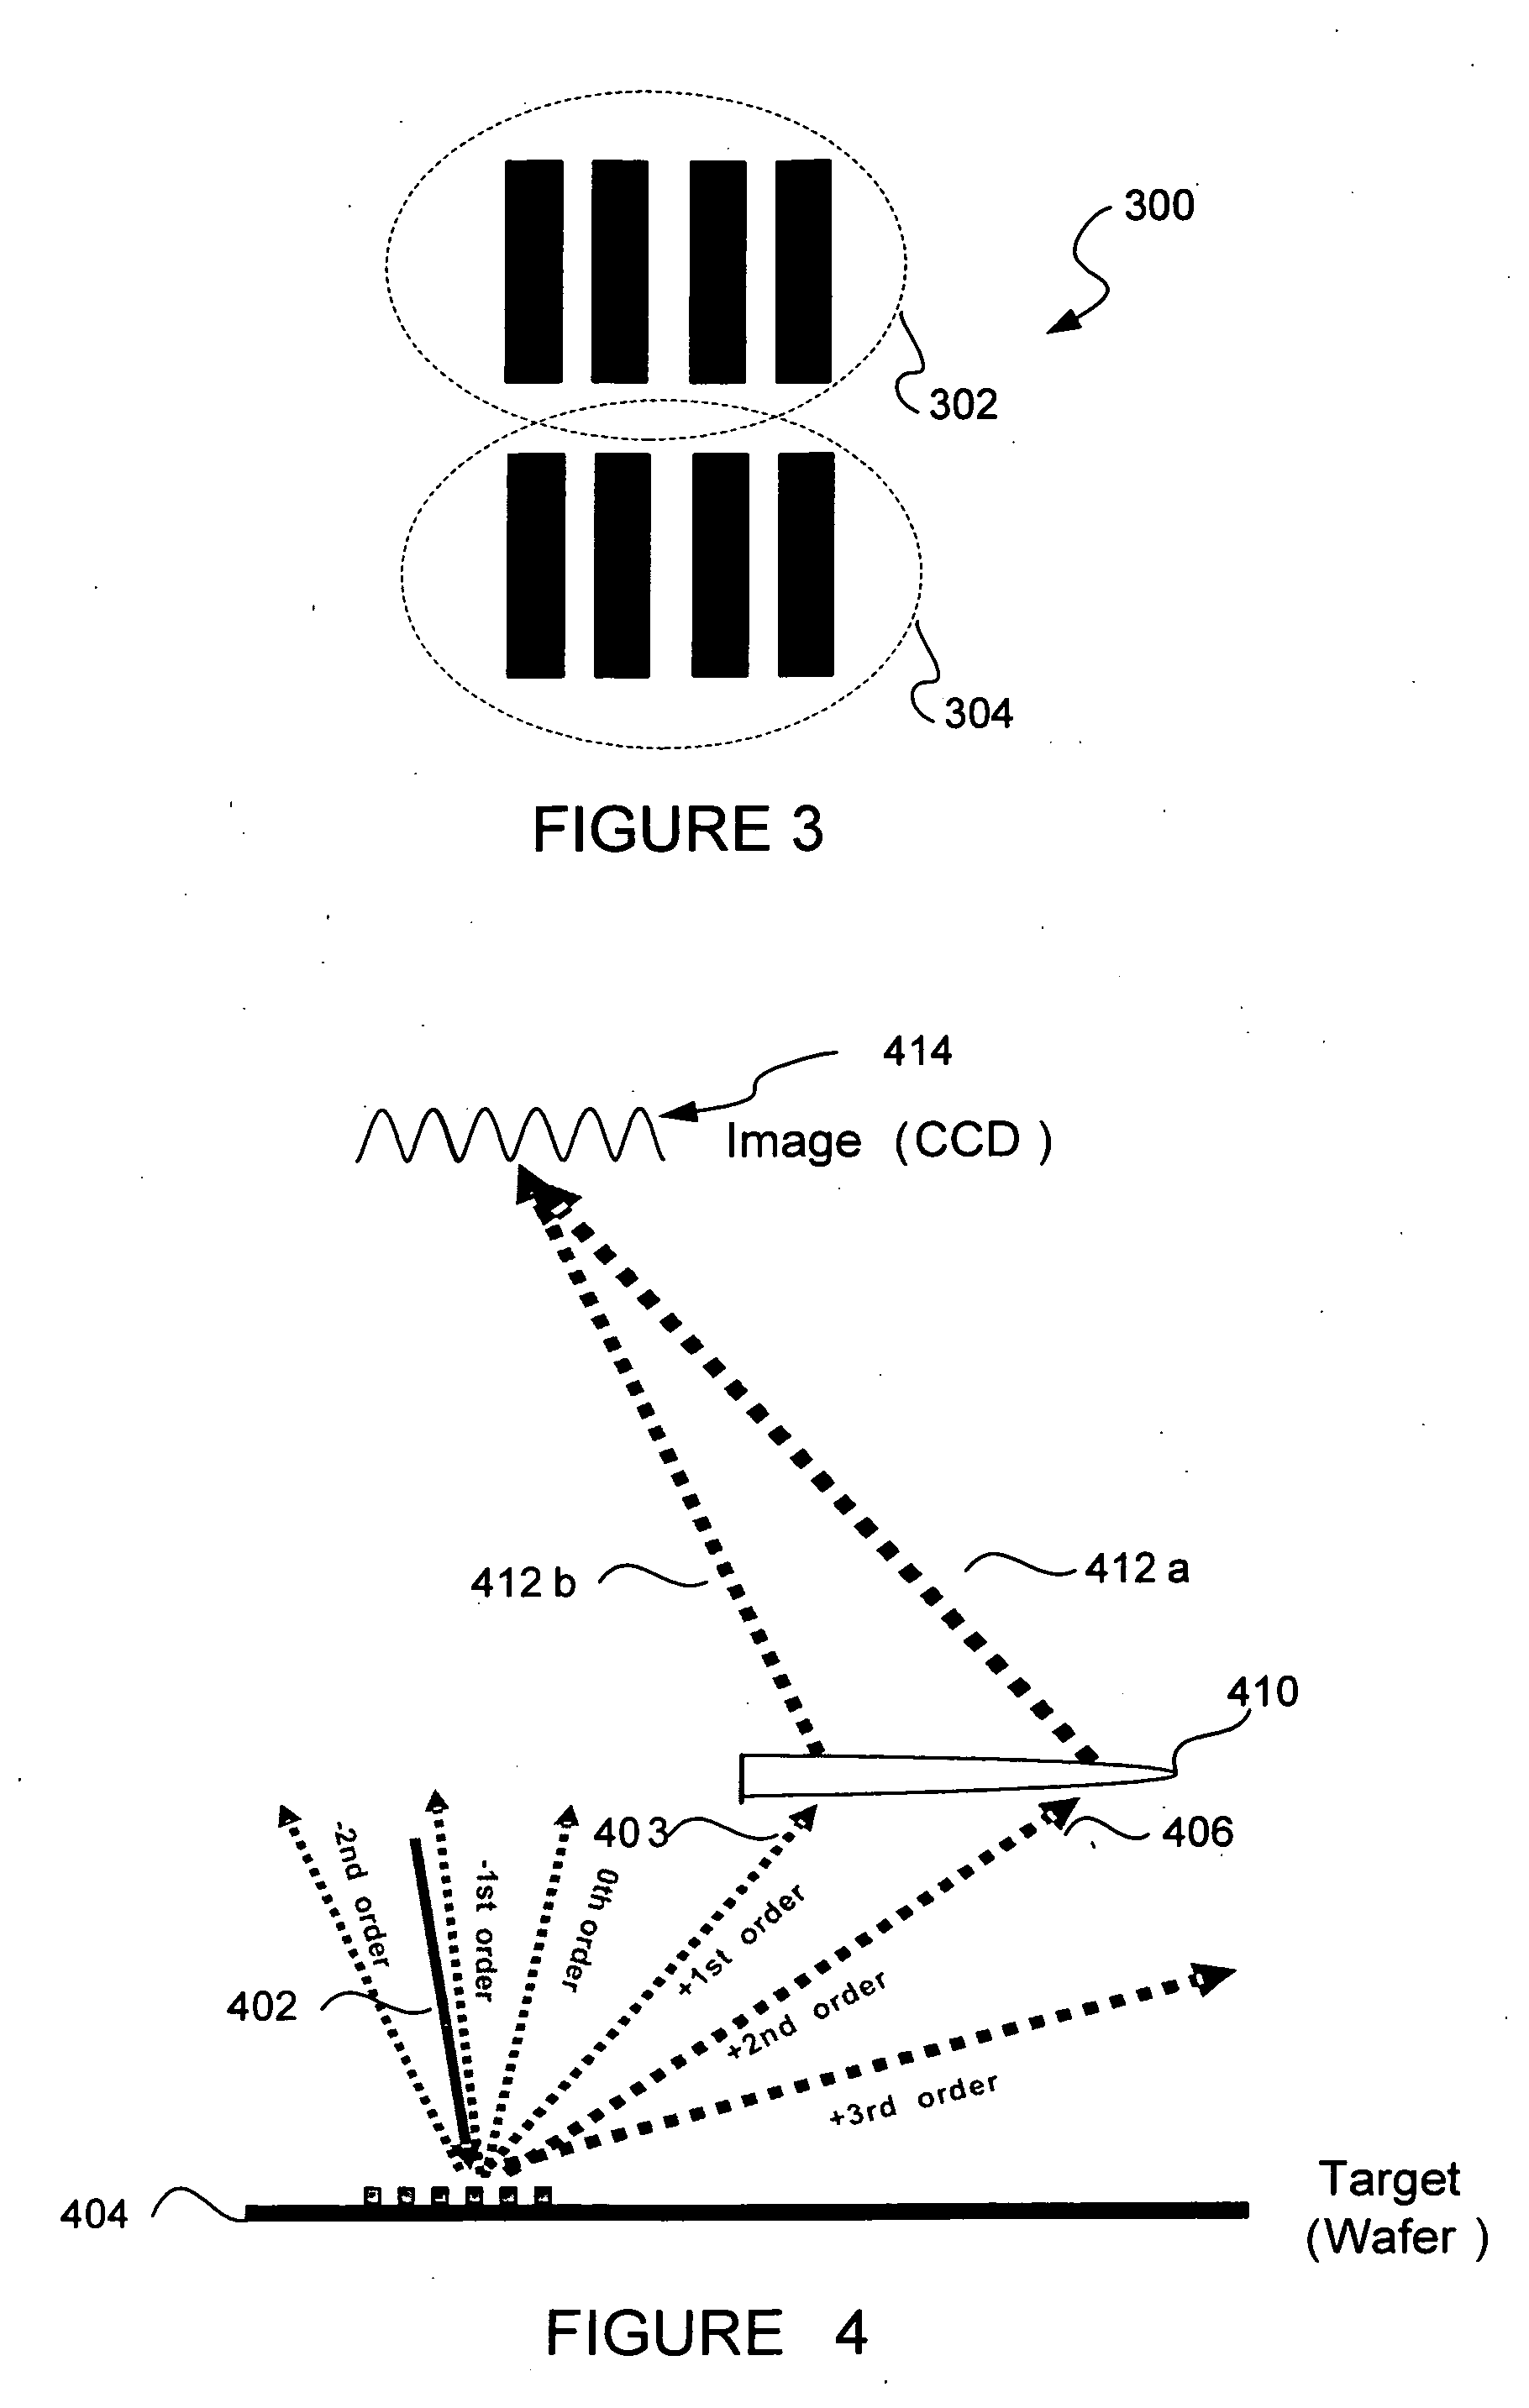 Diffraction order controlled overlay metrology